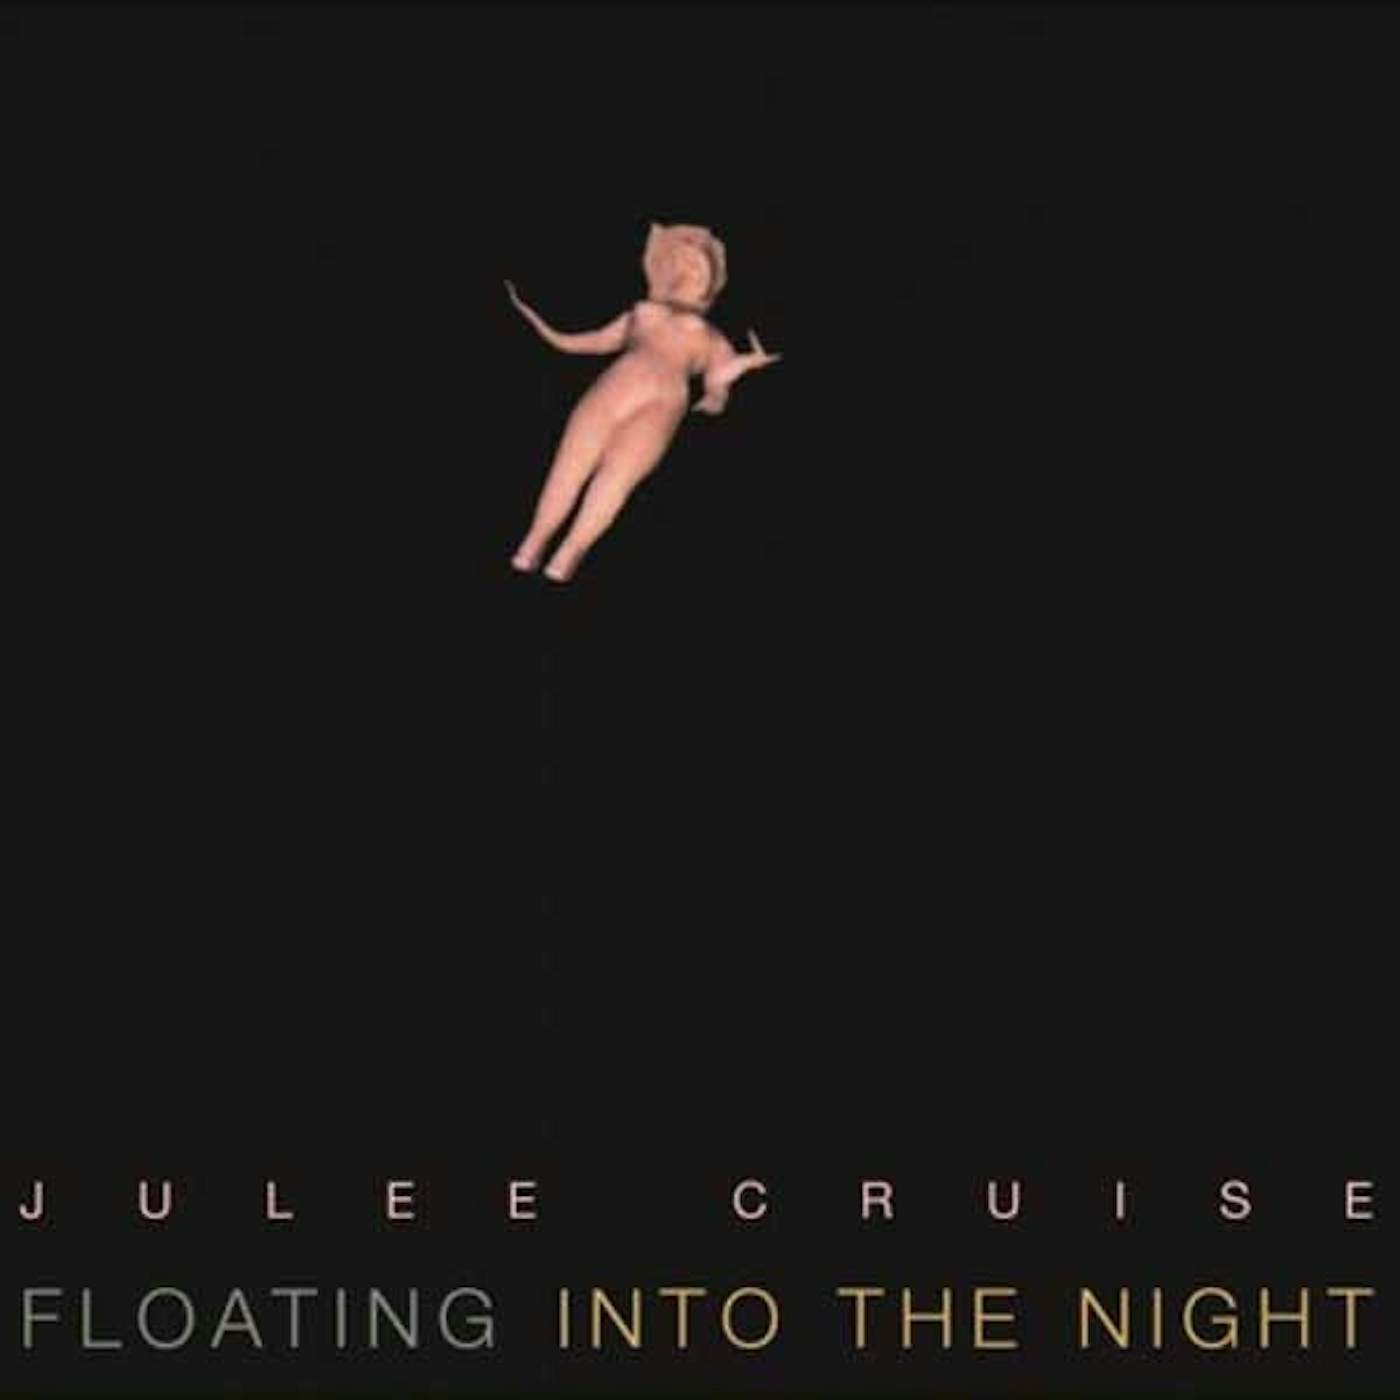 Julee Cruise LP - Floating Into The Night (Vinyl)